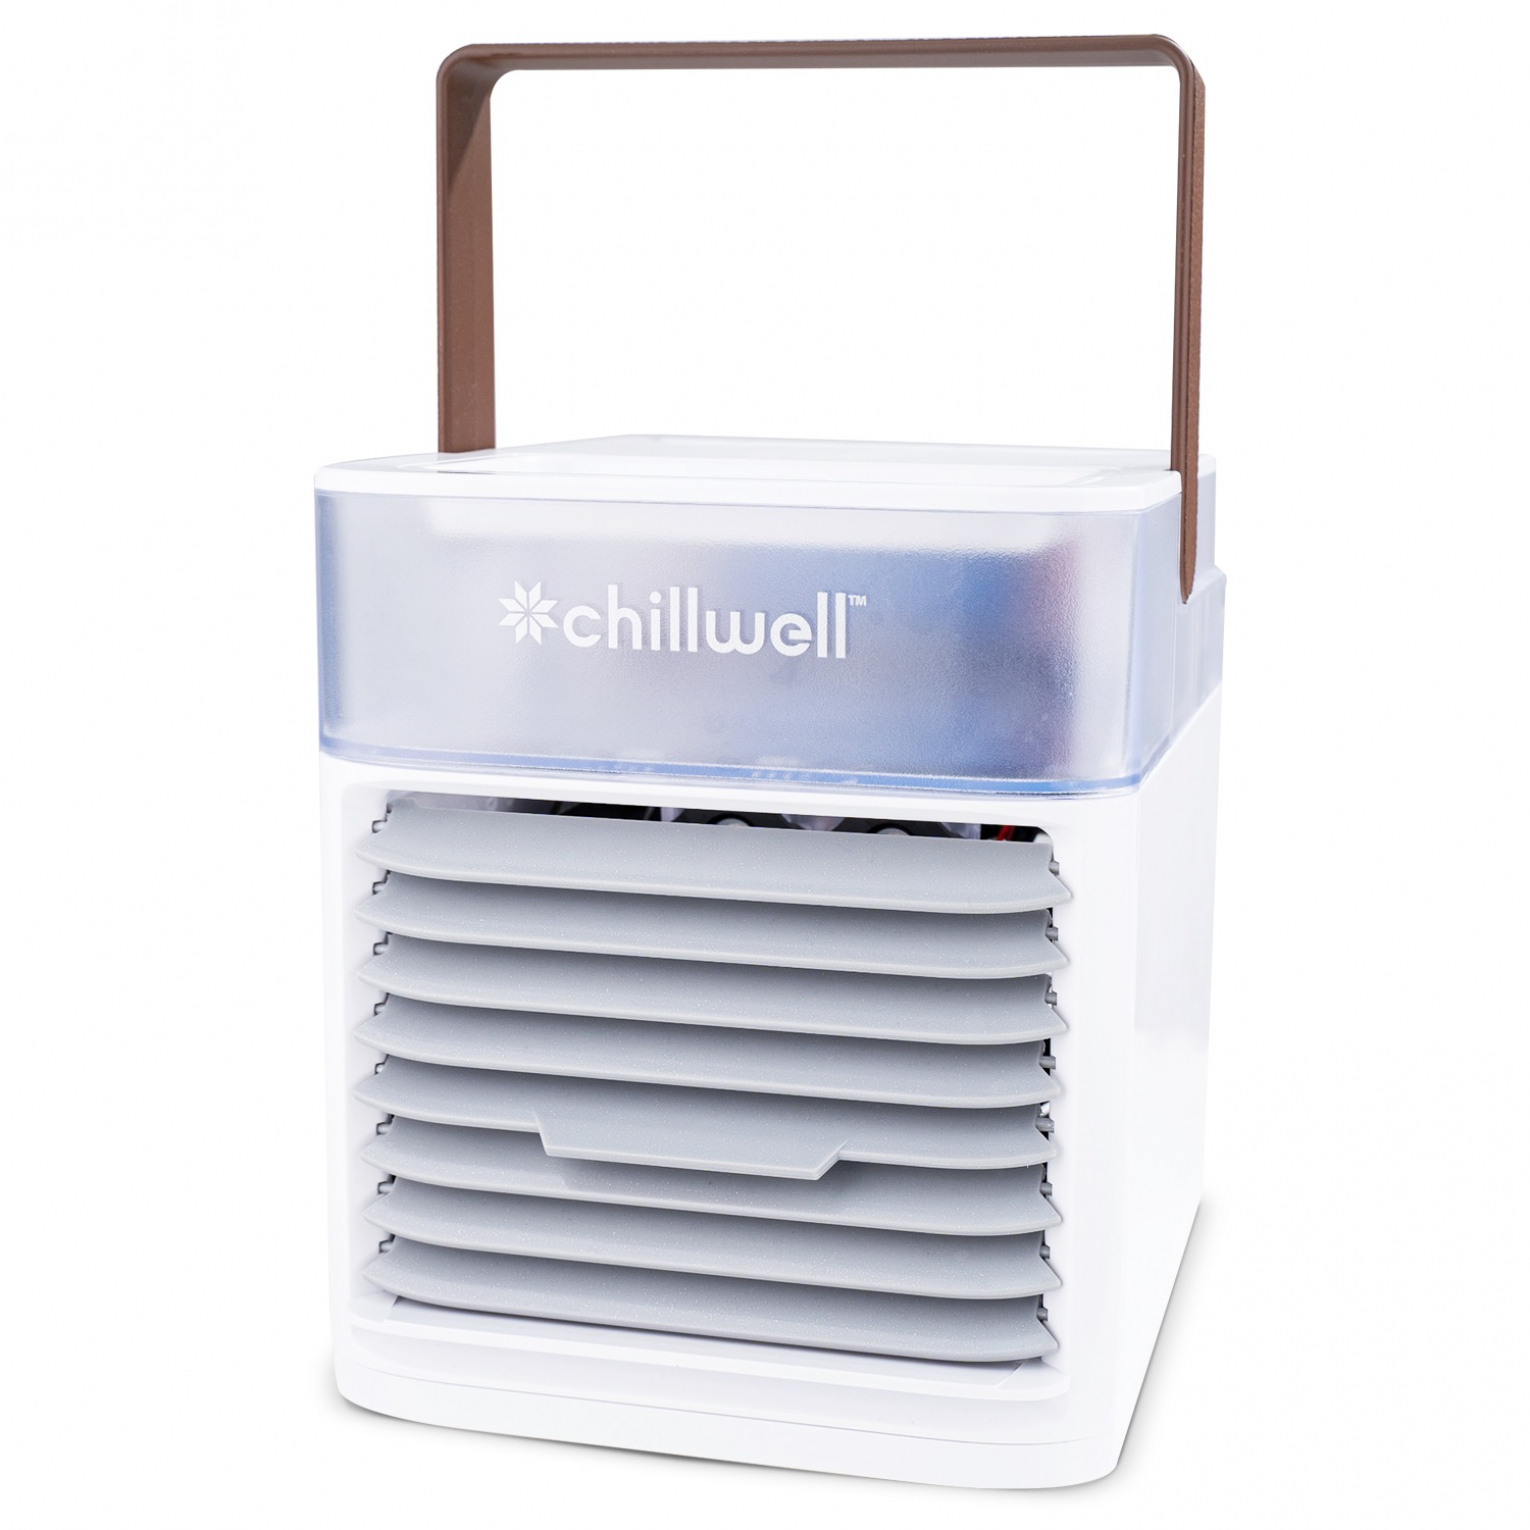 Is Chillwell Ac Portable Ac A Scam